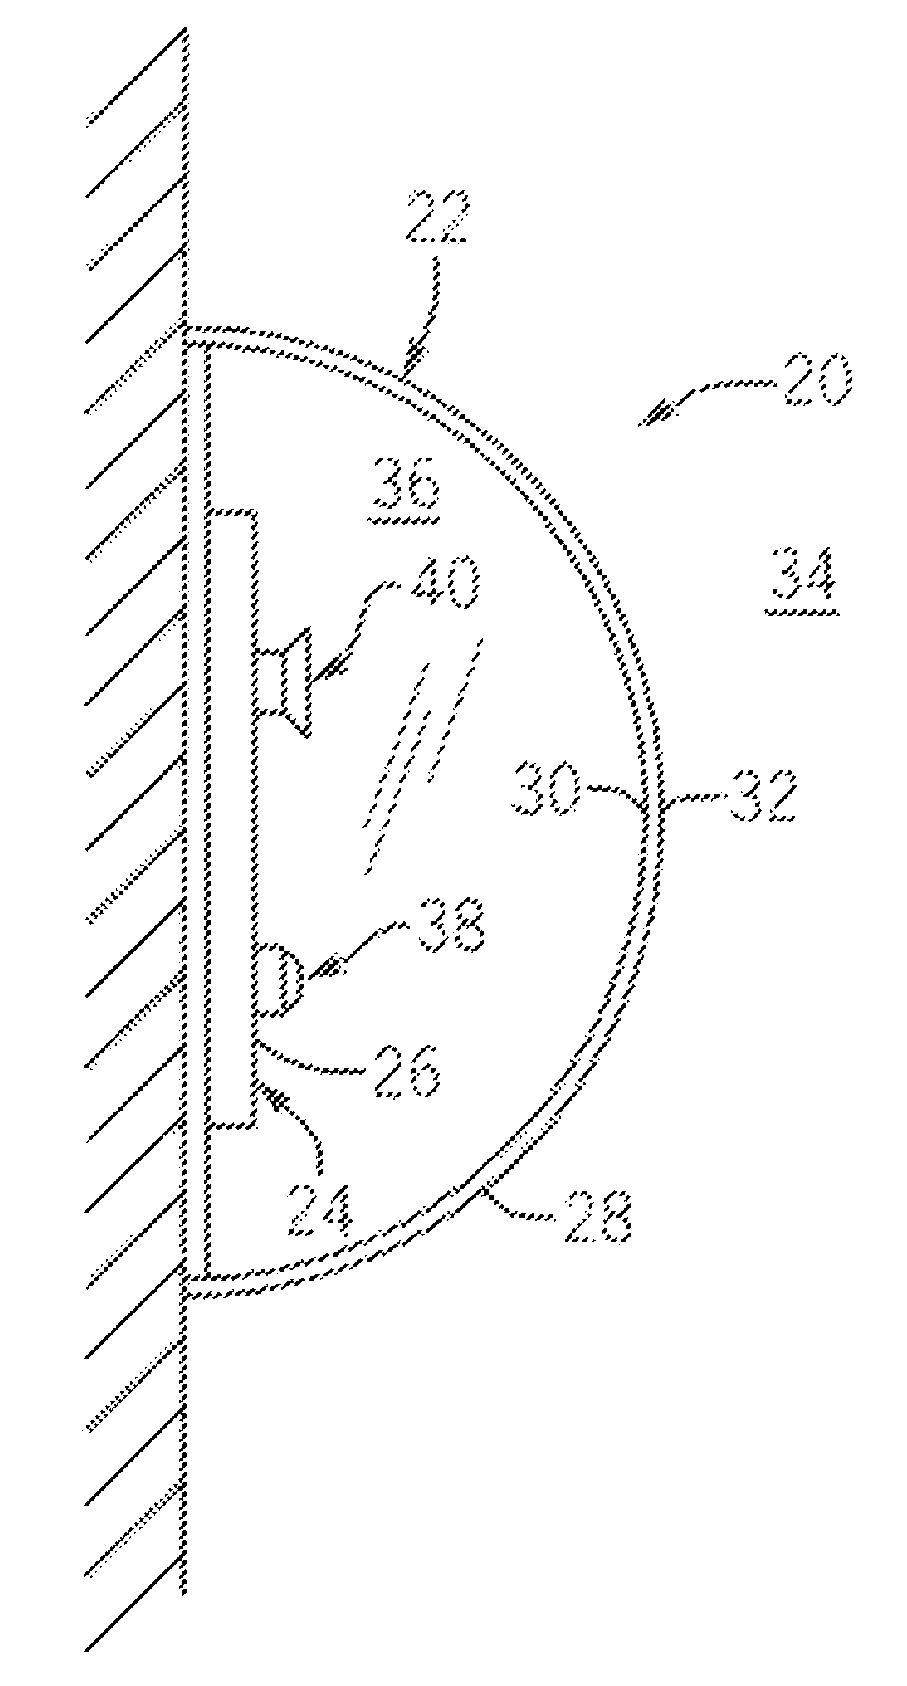 Luminous flux depreciation notification system for light fixtures incorporating light emitting diode sources